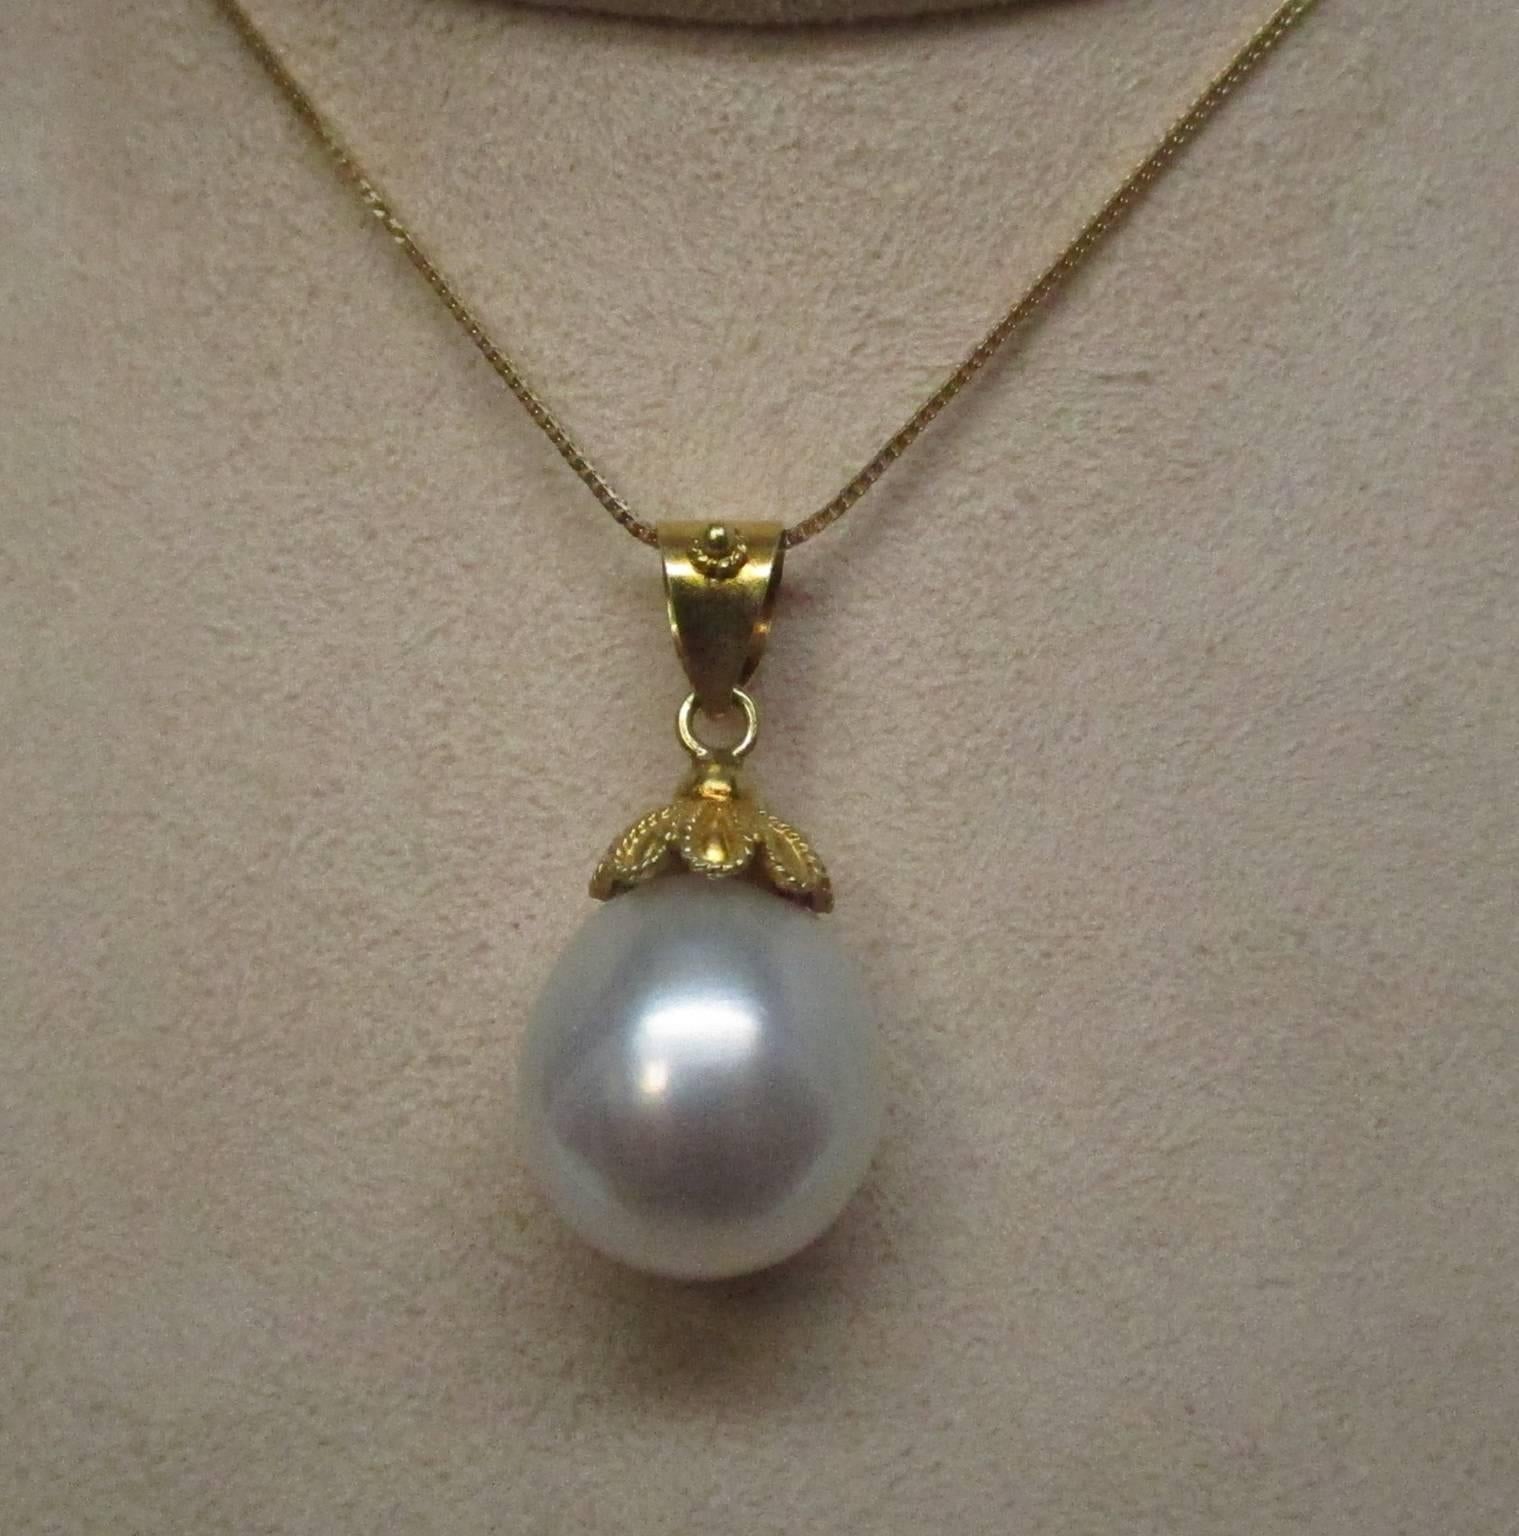 This is a truly impressive South Seas Pearl, 15 x 14 mm, pendant. The cap is 18 karat yellow gold and shows an Etruscan style granular design. It is marked GIKAS. Chain shown is not included, but is available for purchase.

St. John & Myers